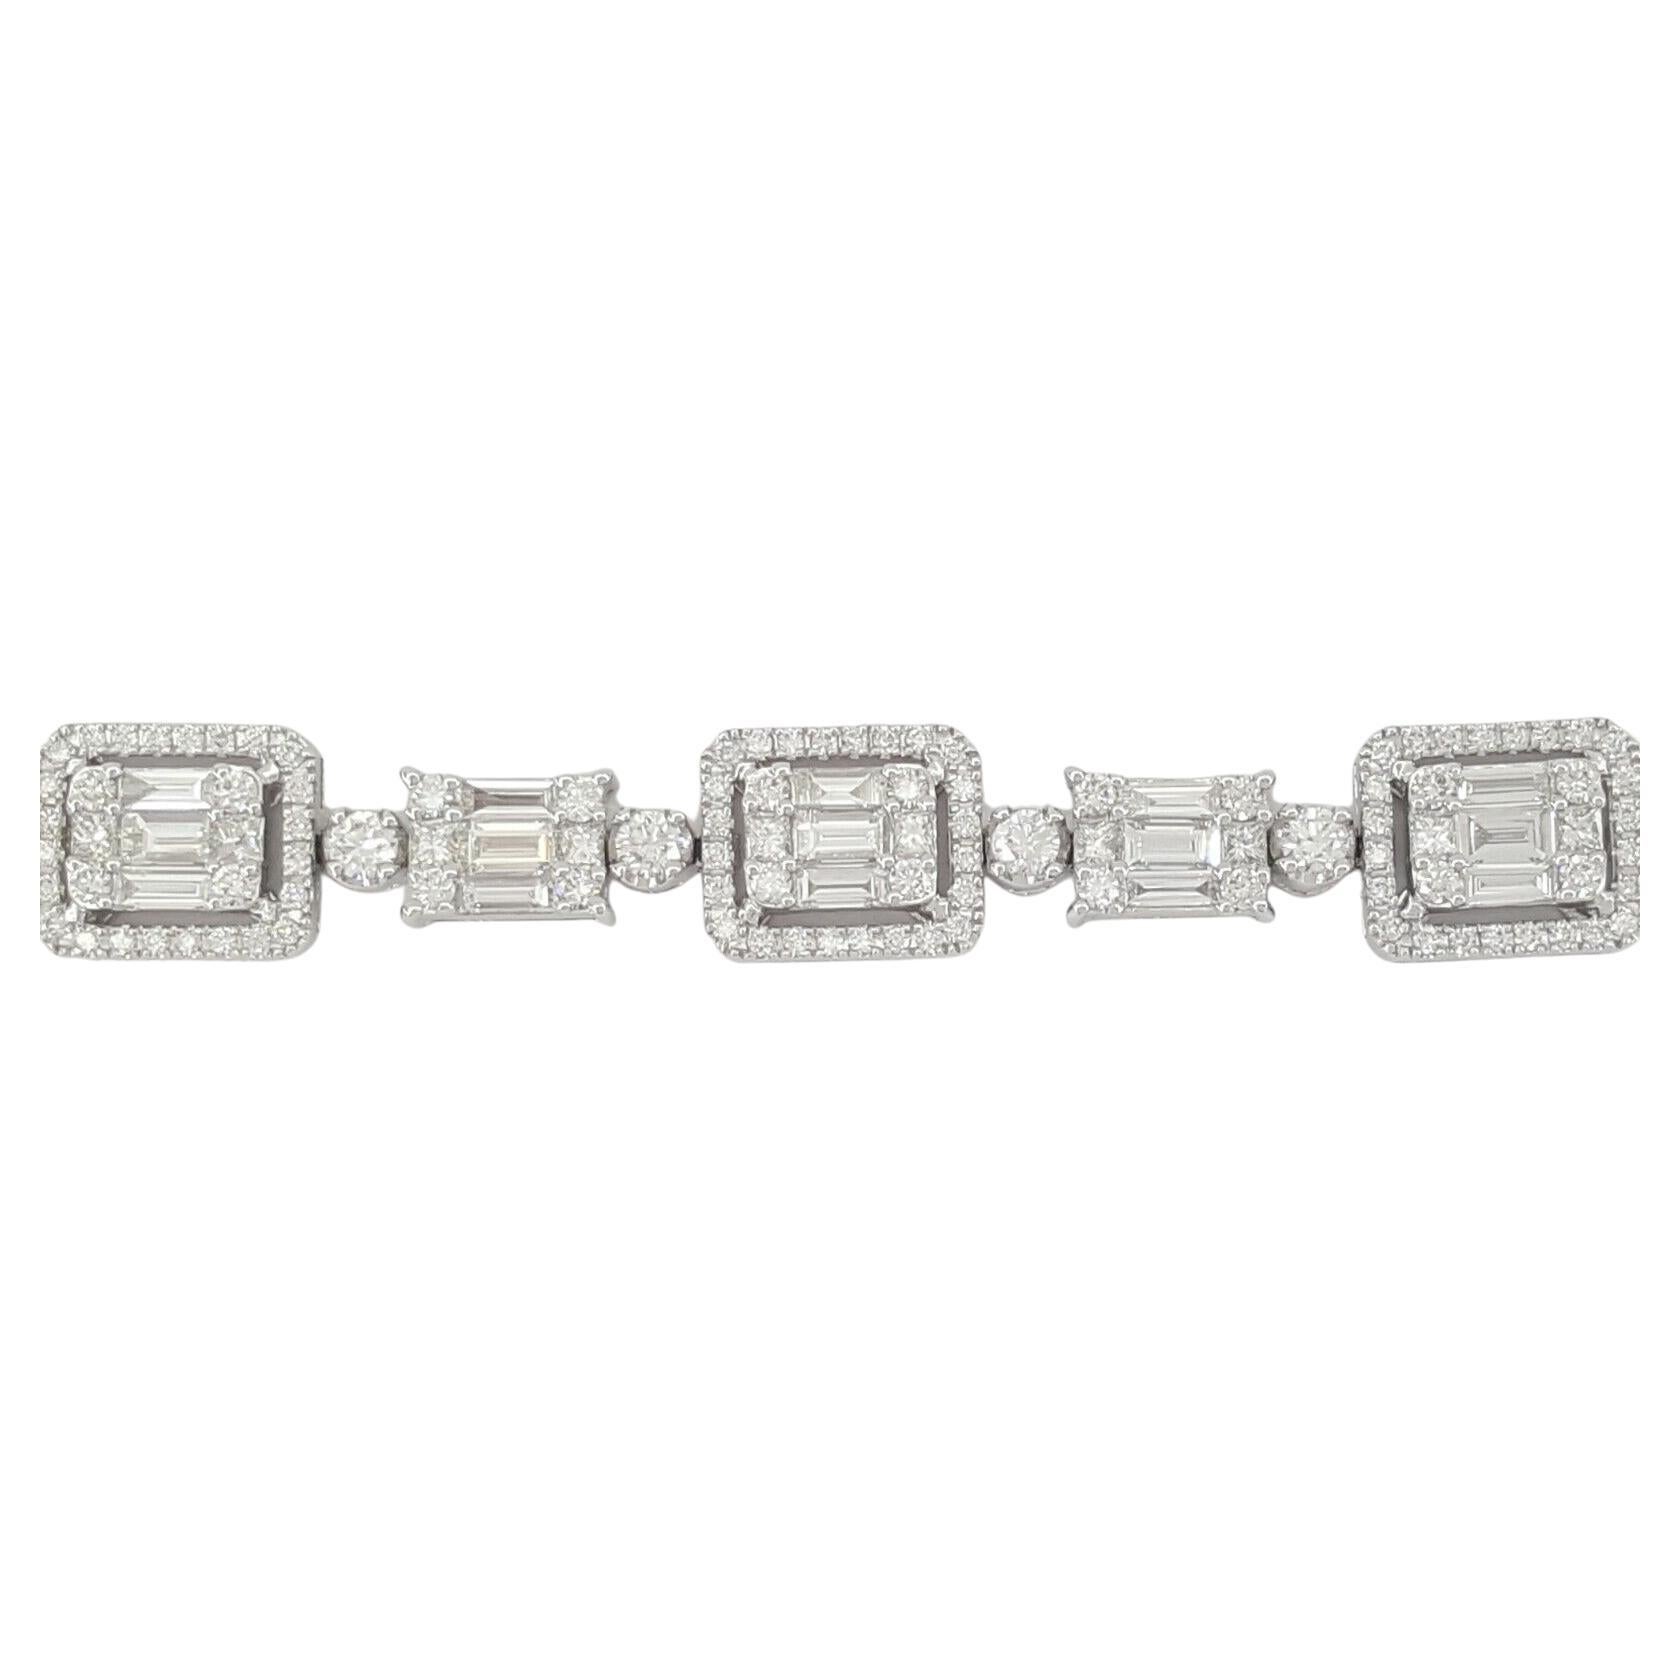 5.5 ct total weight 18K White Gold Round Brilliant, Baguette, & Princess Cut Diamond Halo Tennis Bracelet. 

The bracelet weighs 21 grams, 7.25 inches long, there are 271 Natural Round Brilliant Cut Diamonds weighing approximately 2.3 ct, E-G in